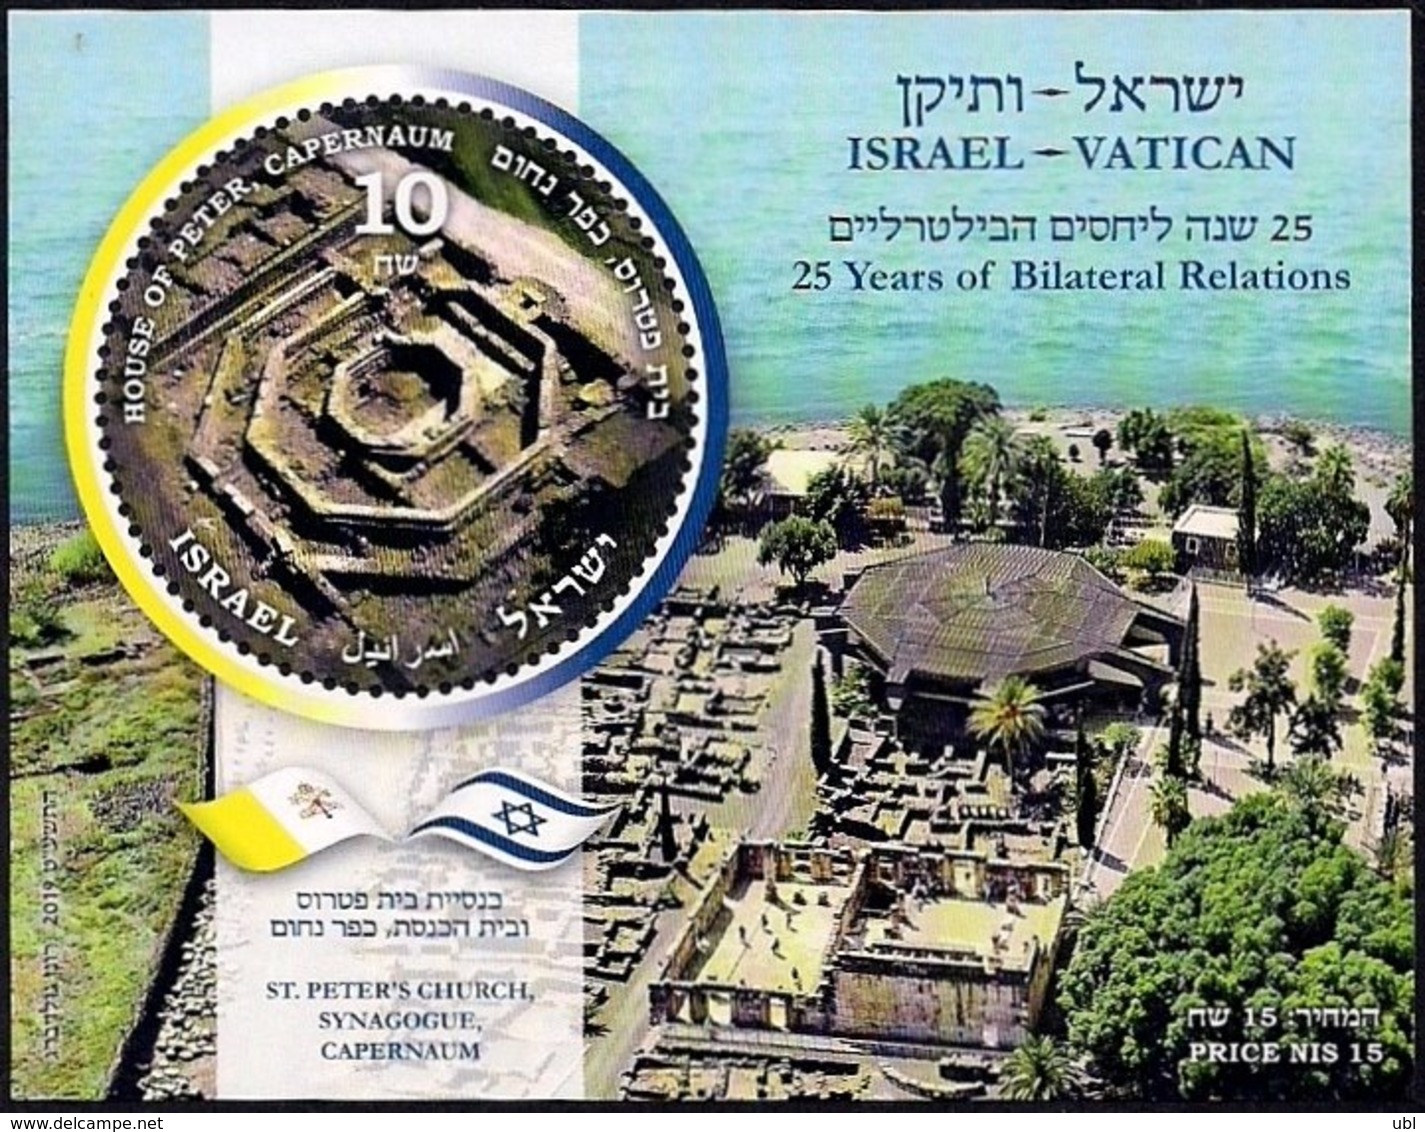 ISRAEL & THE VATICAN Joint Issue 2019 - St. Peter's Byzantine Church In Capernaum - Both Souvenir Sheets - MNH - Archaeology